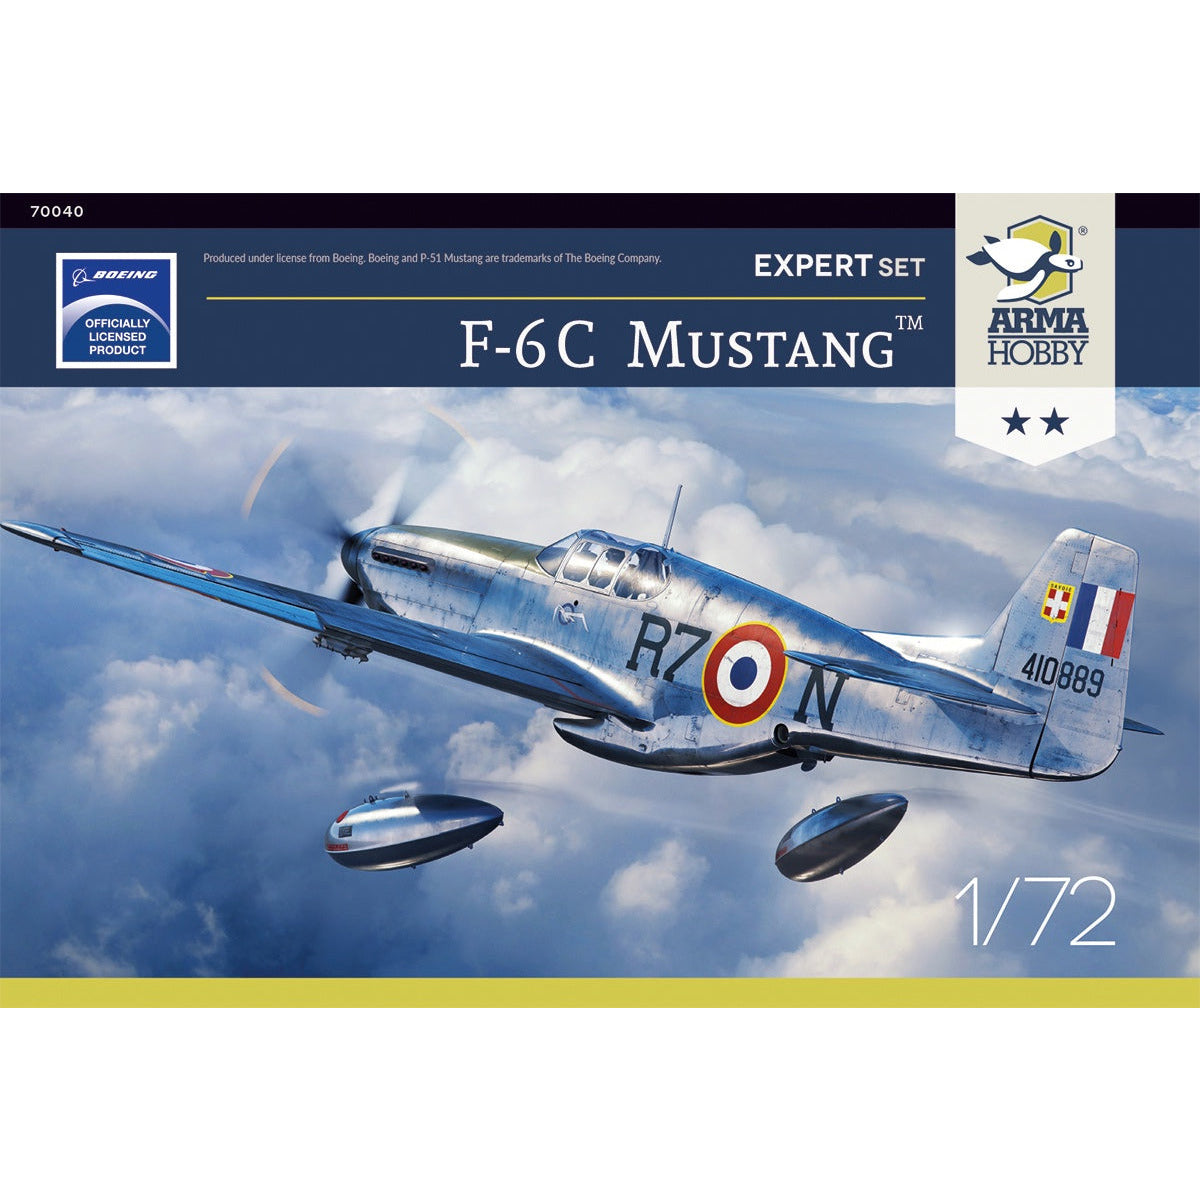 F-6C Mustang Expert Set 1/72 #70040 by Arma Hobby